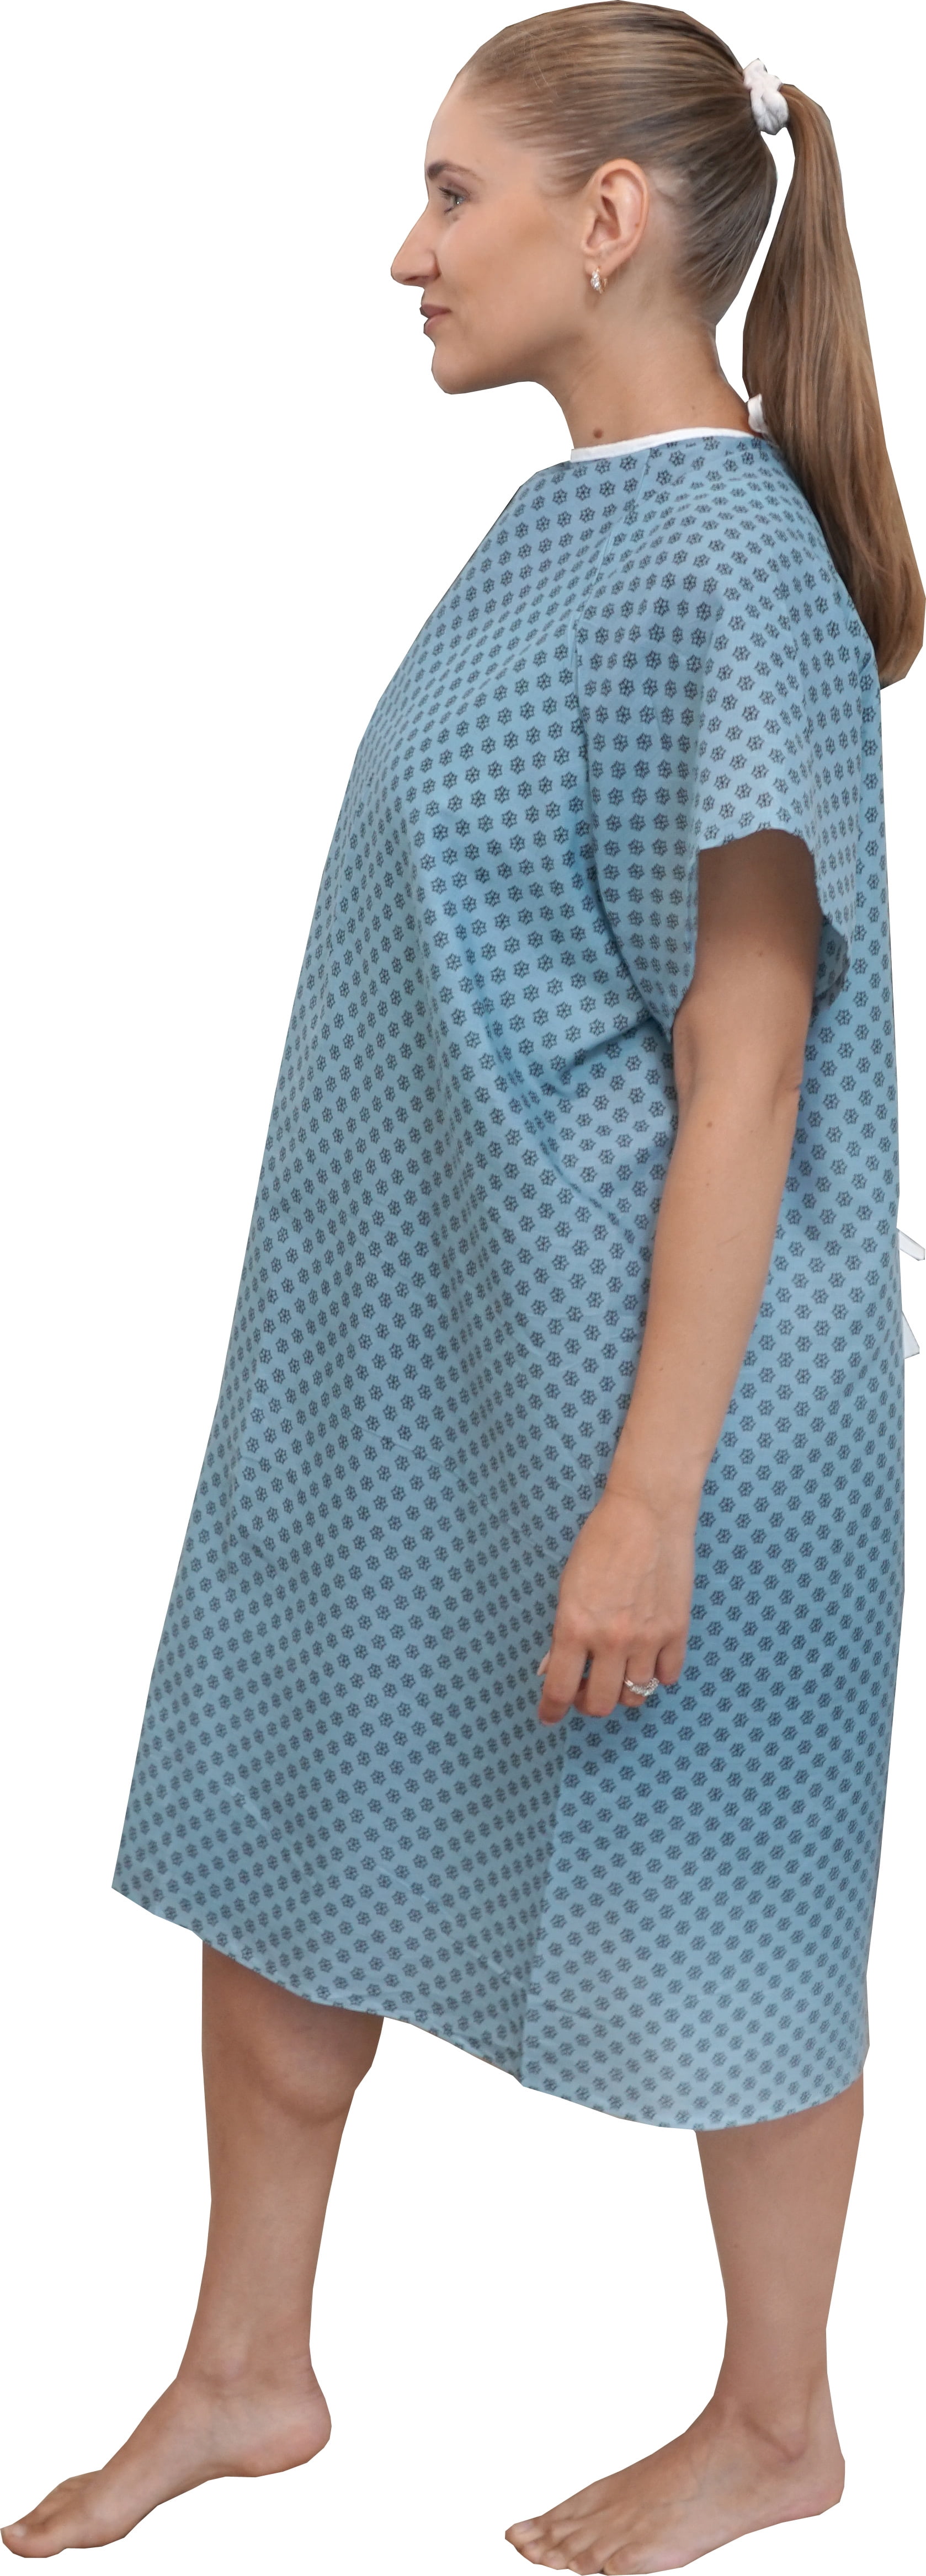 Disposable Patient Gown Manufacturer,Supplier in Dindigul - Best Price